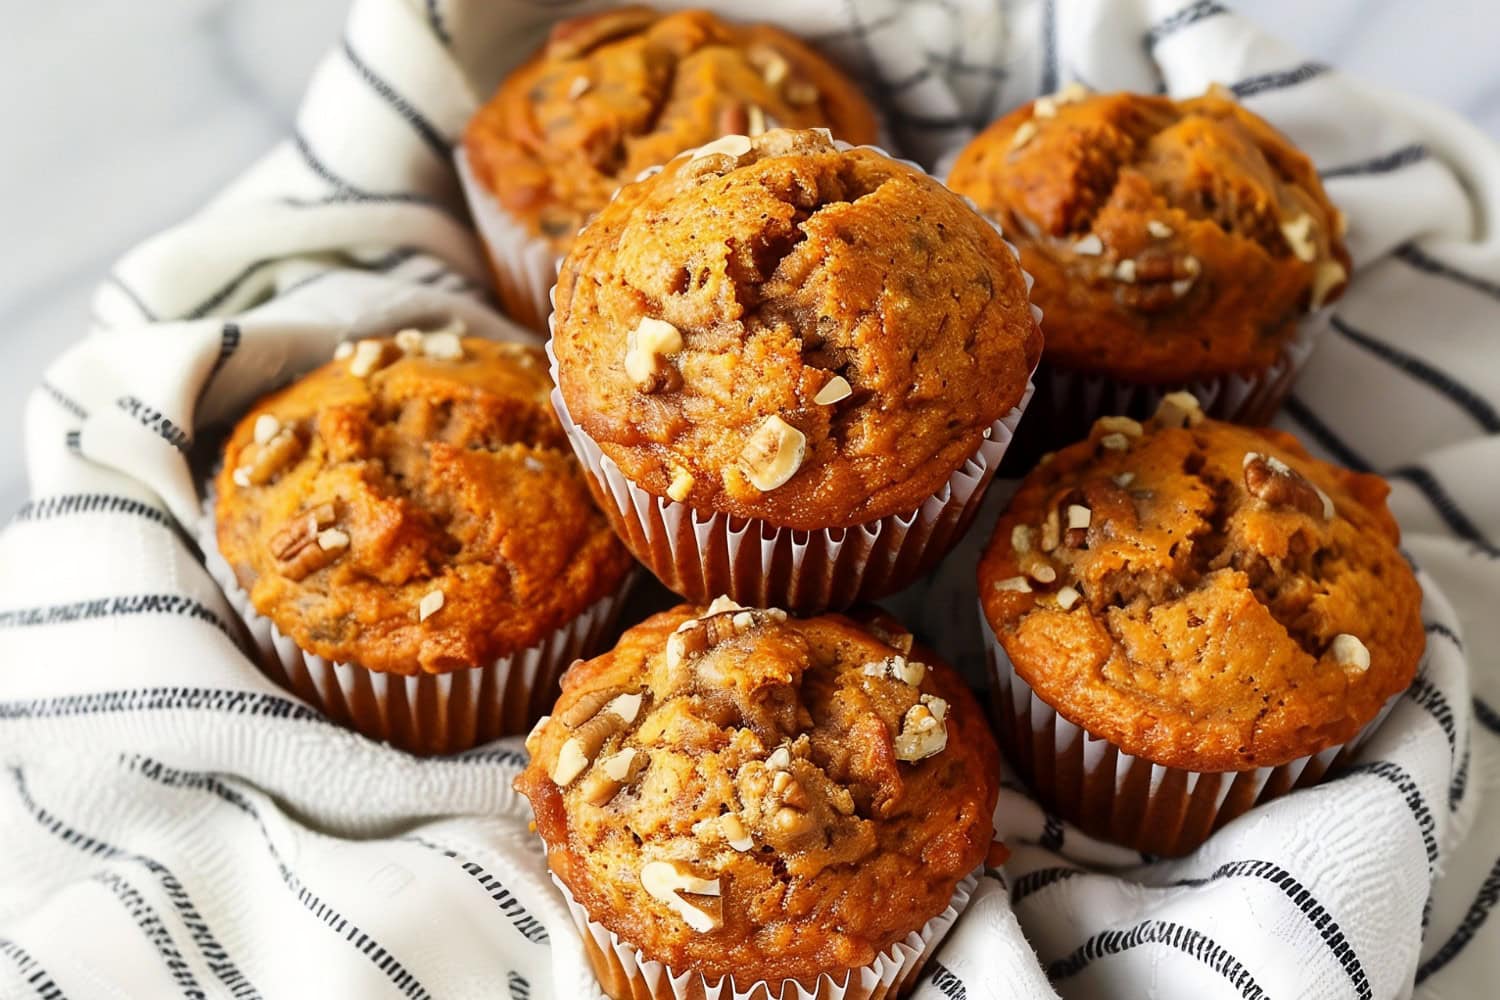 Flavorful carrot muffins, featuring a blend of warm spices and a touch of crunchy nuts